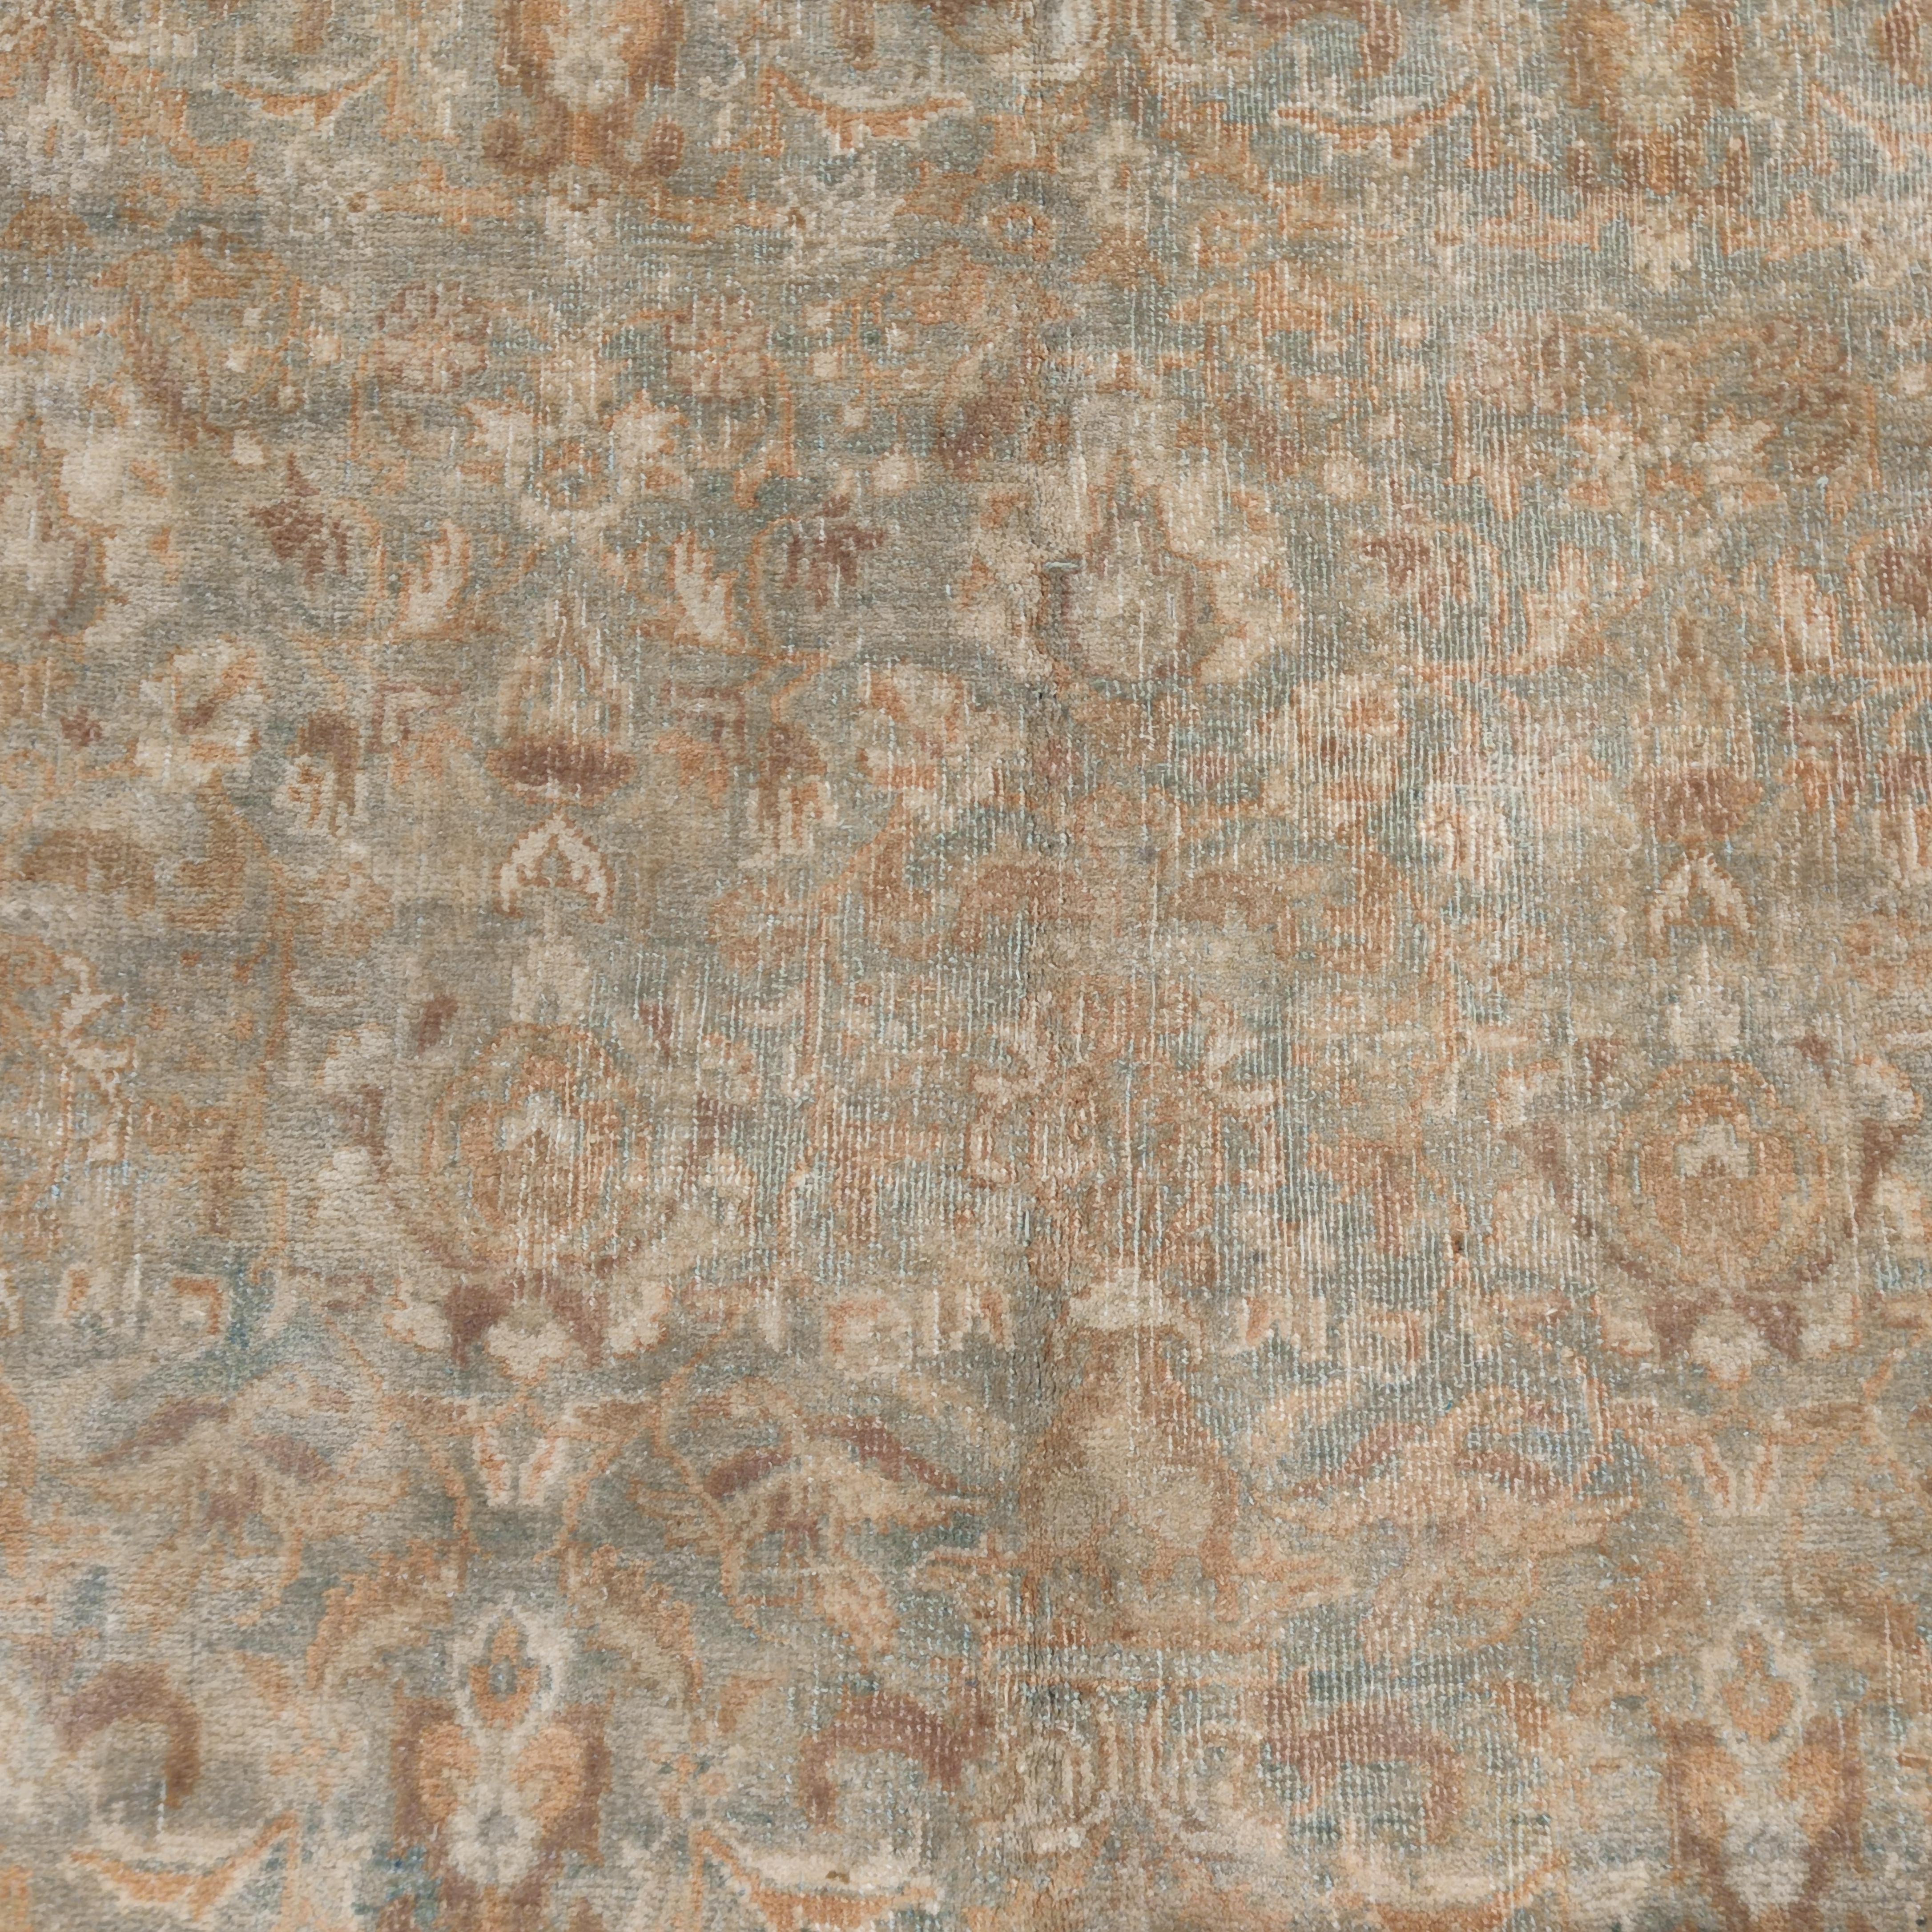 Indian Antique Teal Blue Agra Rug with All-Over Pattern